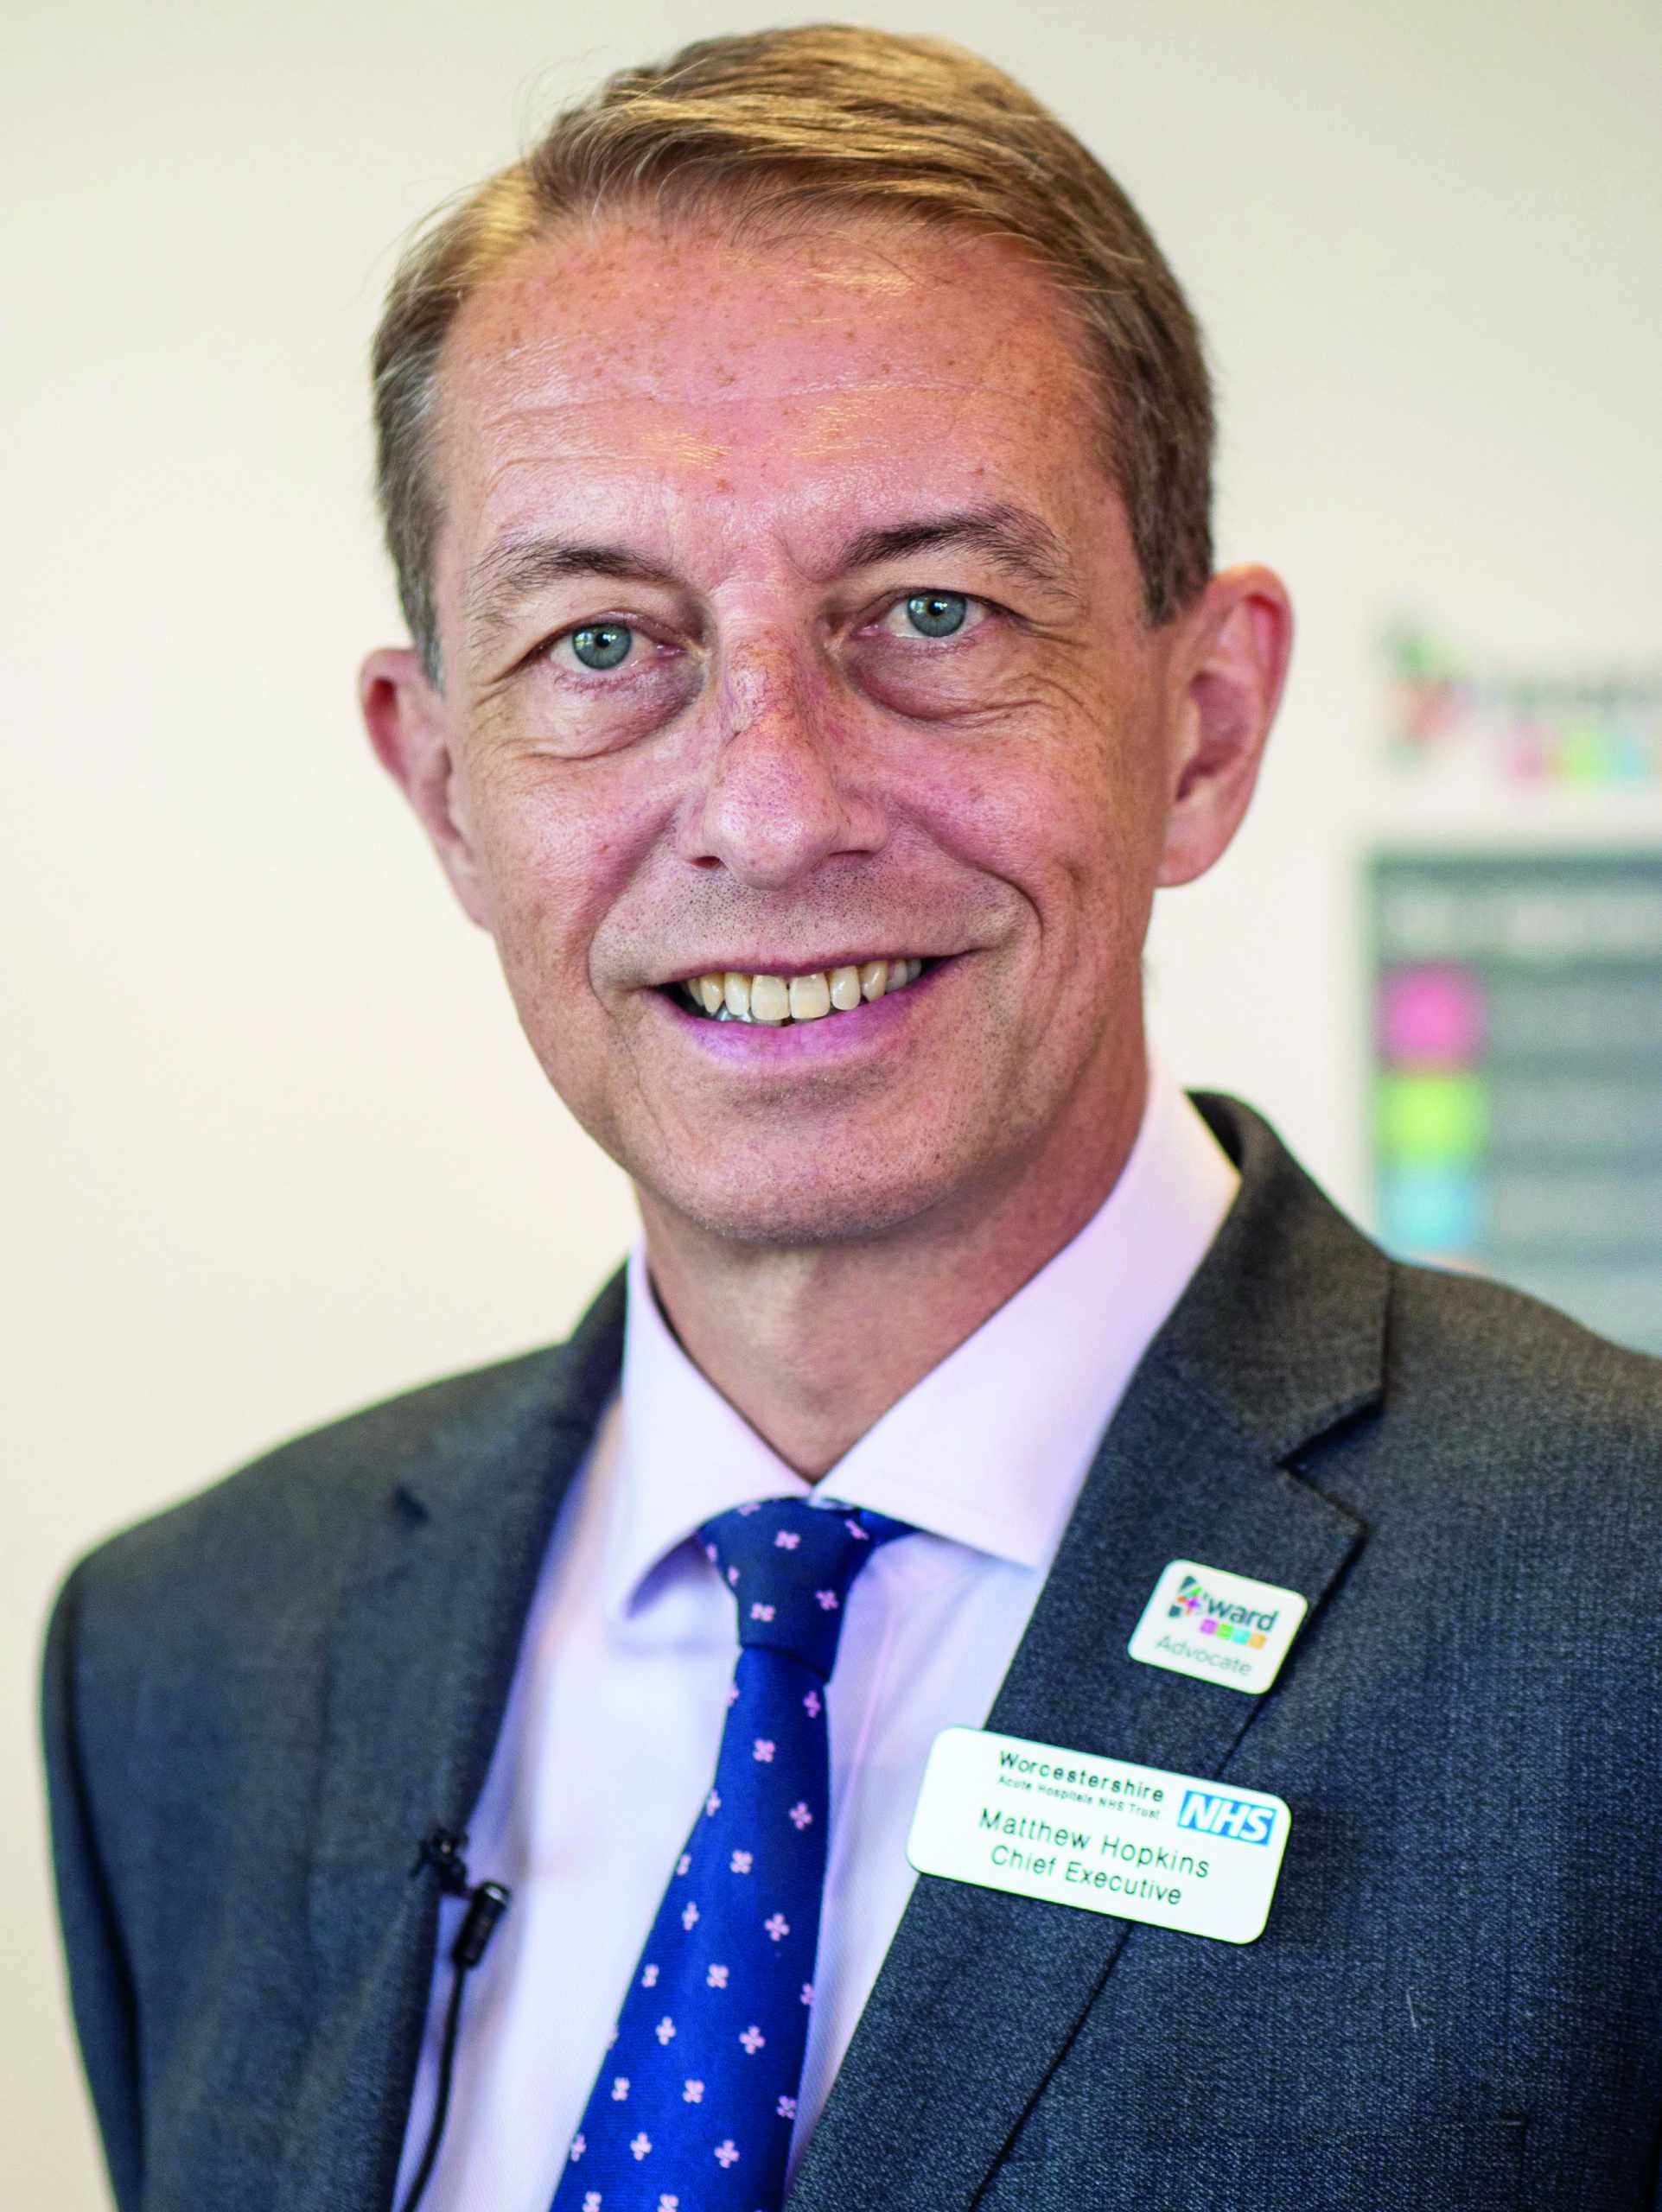 THE Mid and South Essex NHS Foundation Trust has announced the appointment of a new Chief Executive.